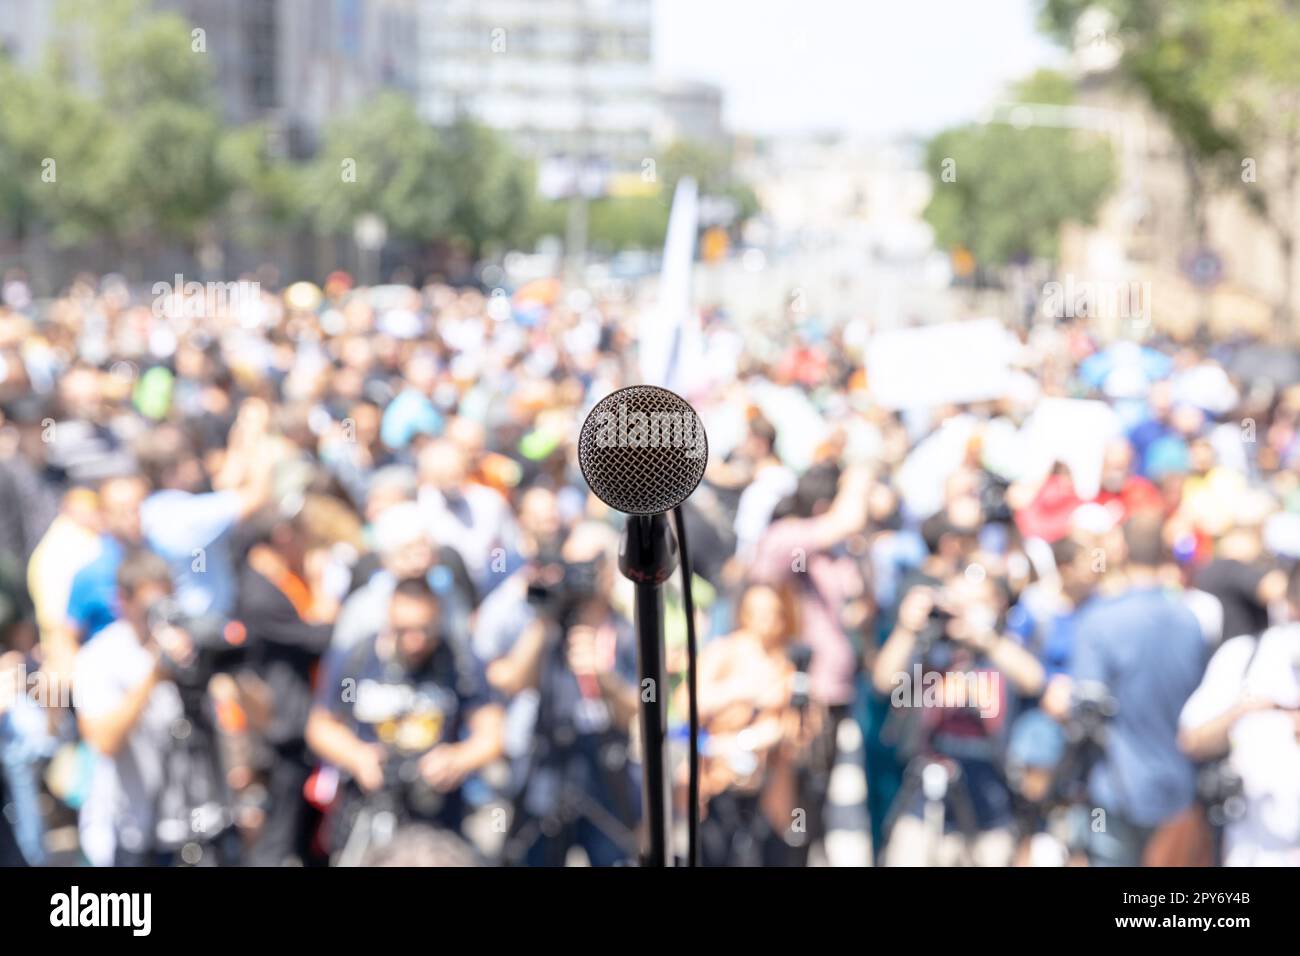 Focus on microphone, blurred group of people at mass protest in the background Stock Photo